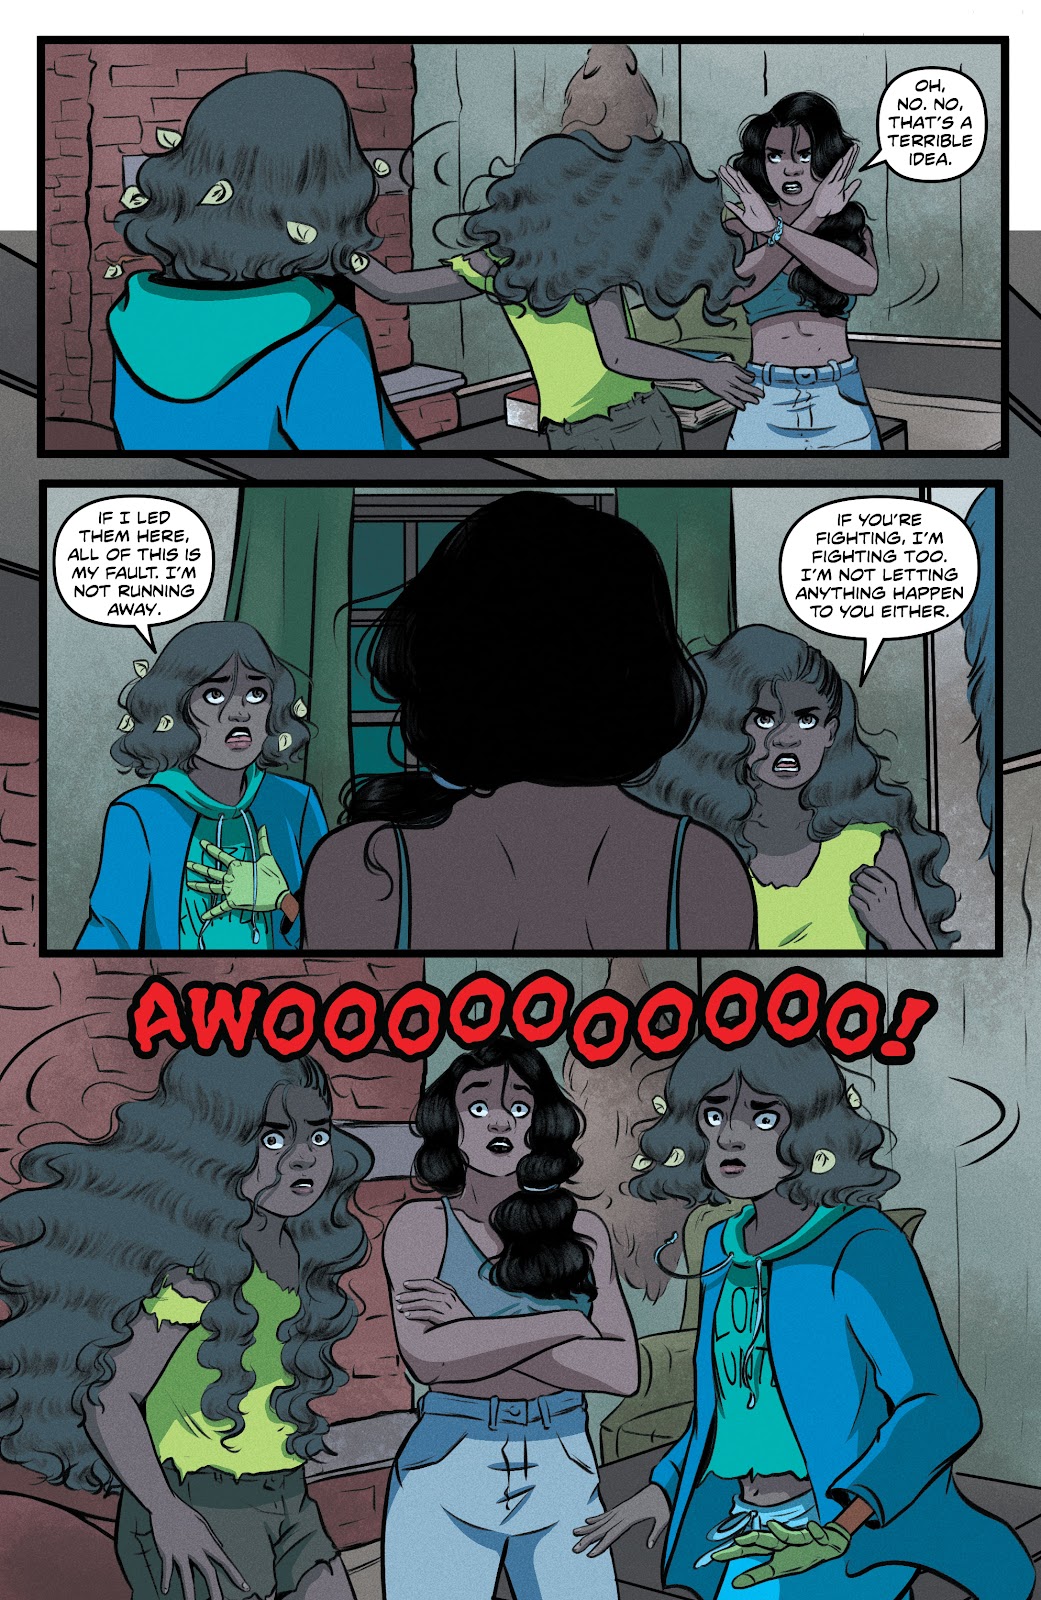 Goosebumps: Secrets of the Swamp issue 4 - Page 8